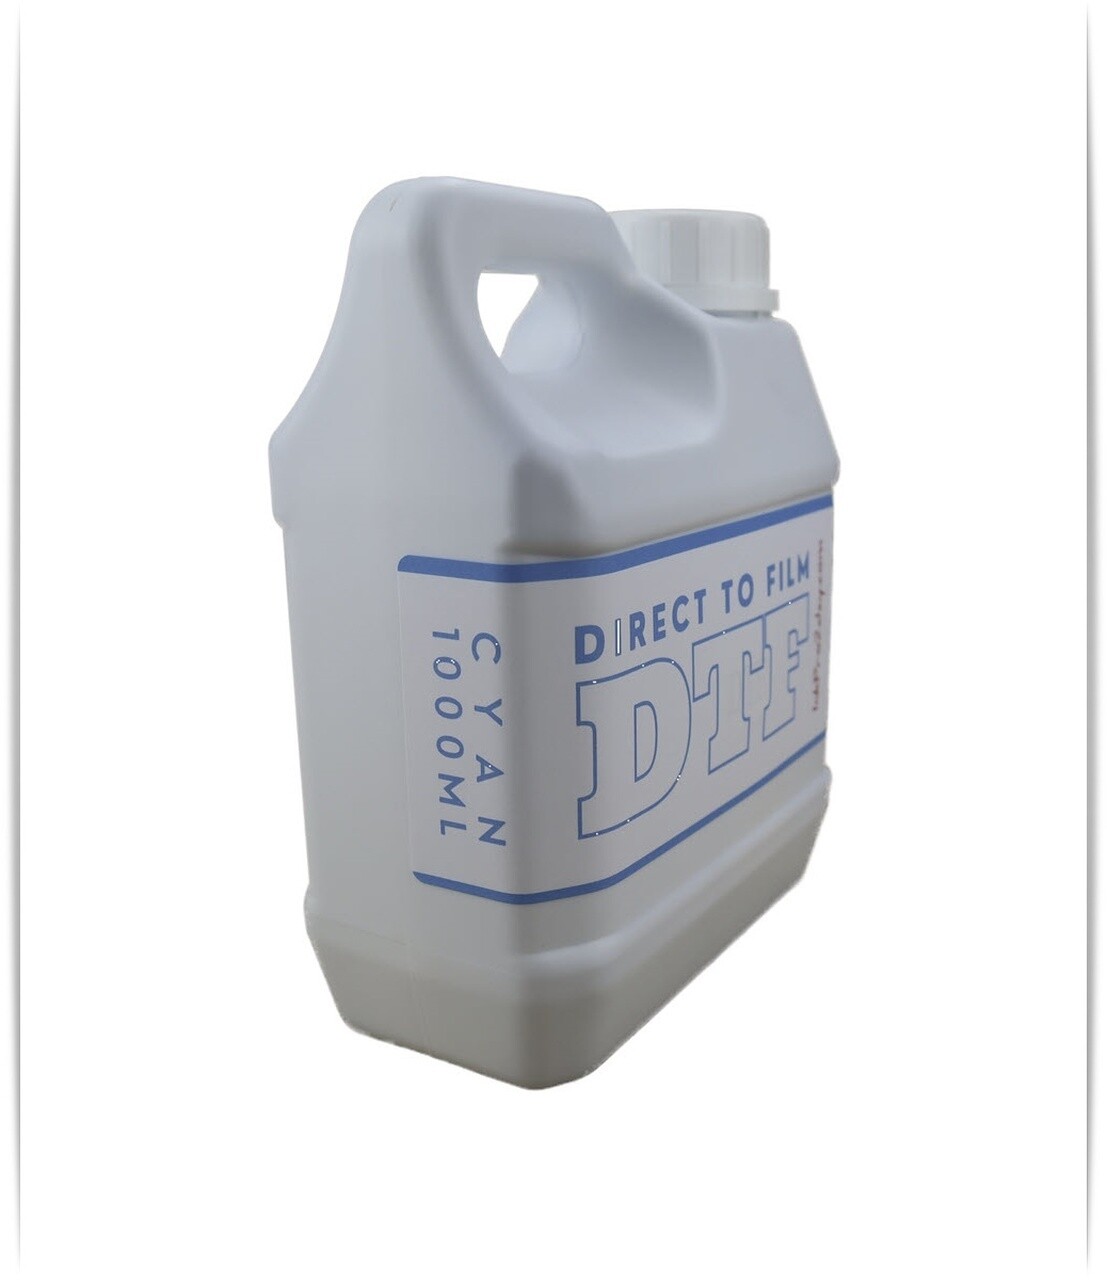 Cyan DTF Ink Direct To Film 1000ml Bottle for Epson, Epson Print Head printers